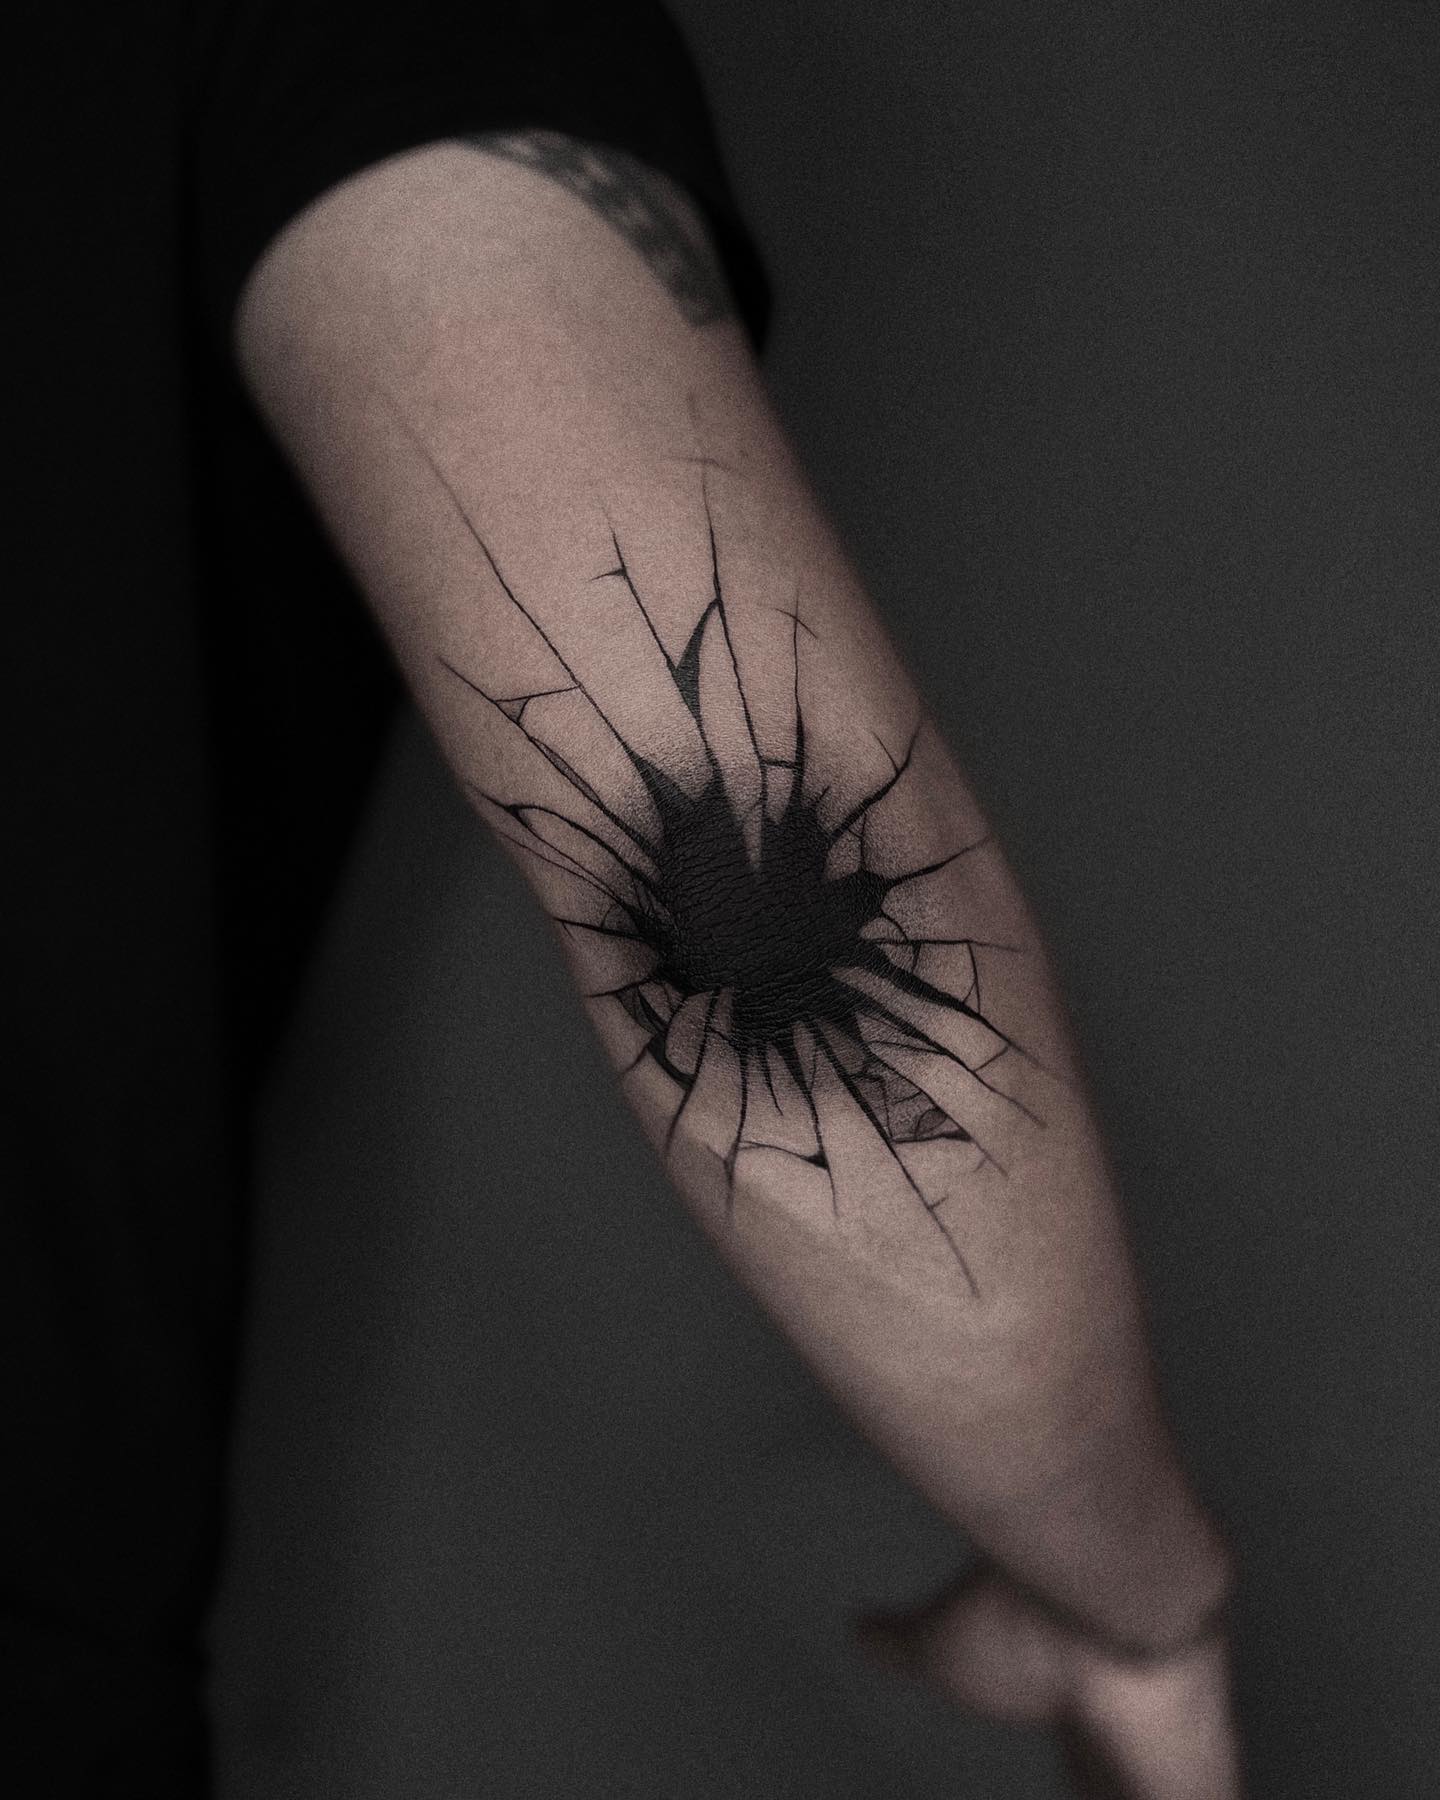 Shattered glass and ink going all over your elbow can represent your wish for renewal. If you’ve been dealing with negative, bad, and built-up emotions, try out this tattoo and show your growth and how you overcome fear.